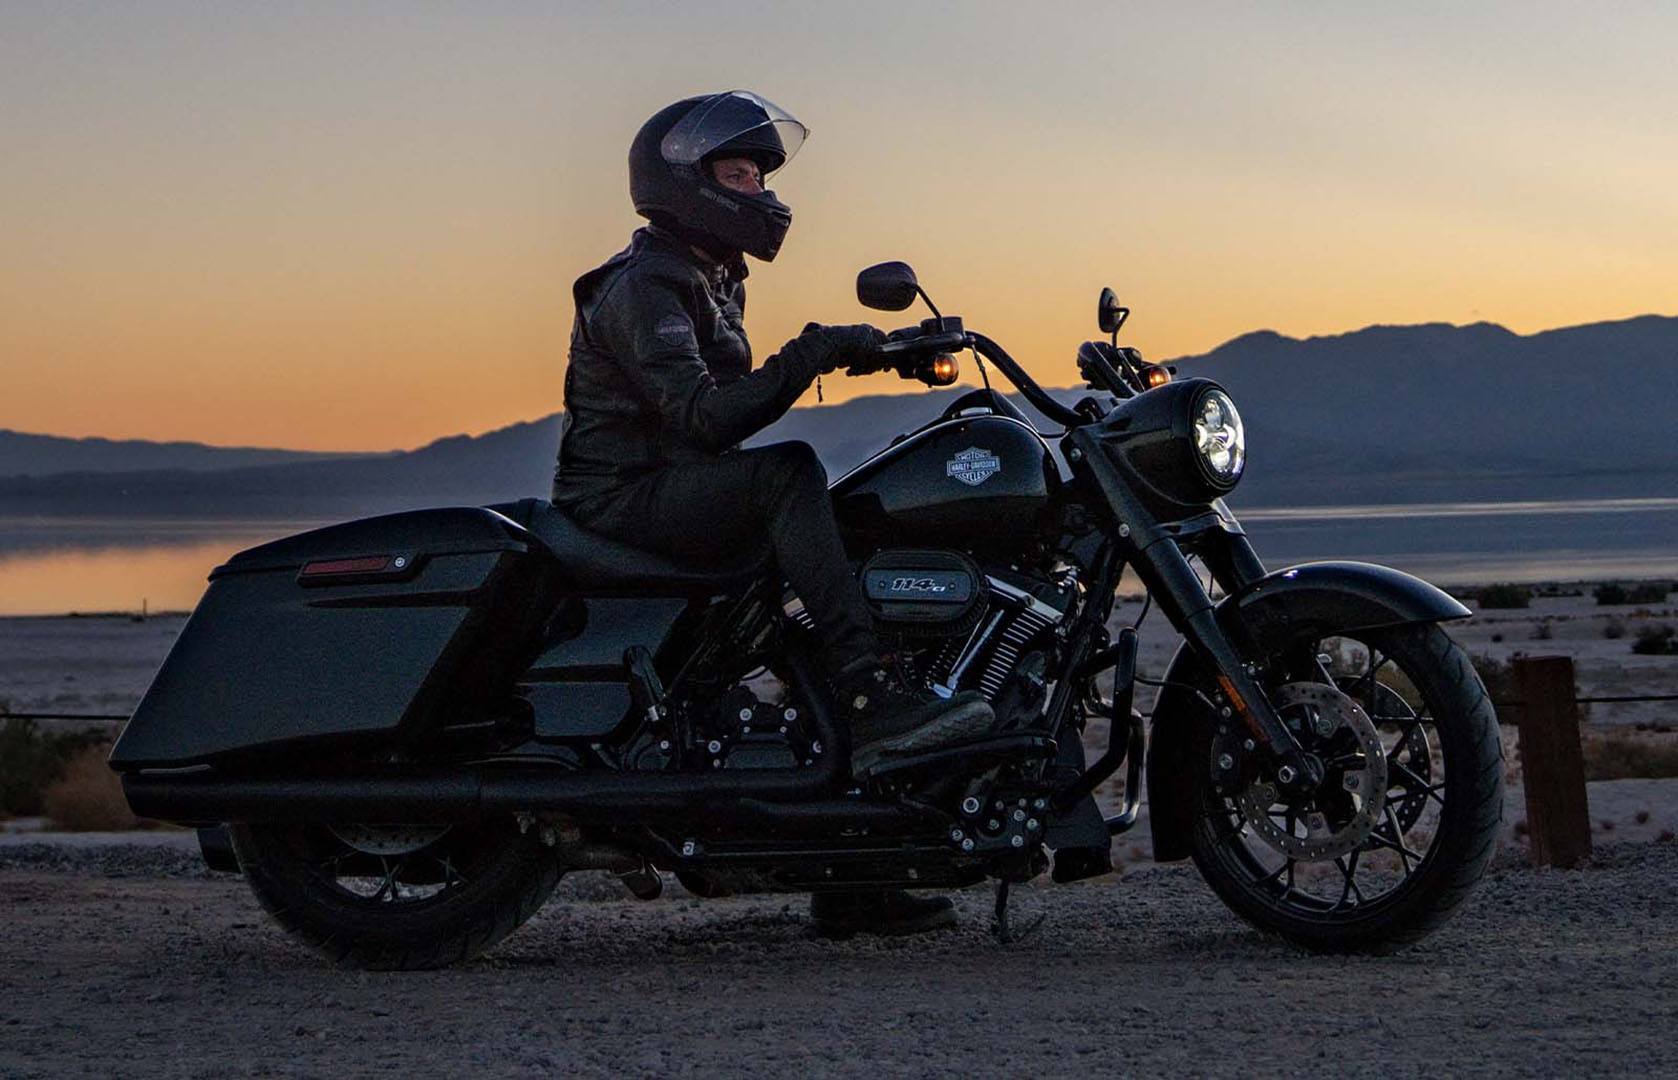 2022 Harley-Davidson Road King® Special in West Long Branch, New Jersey